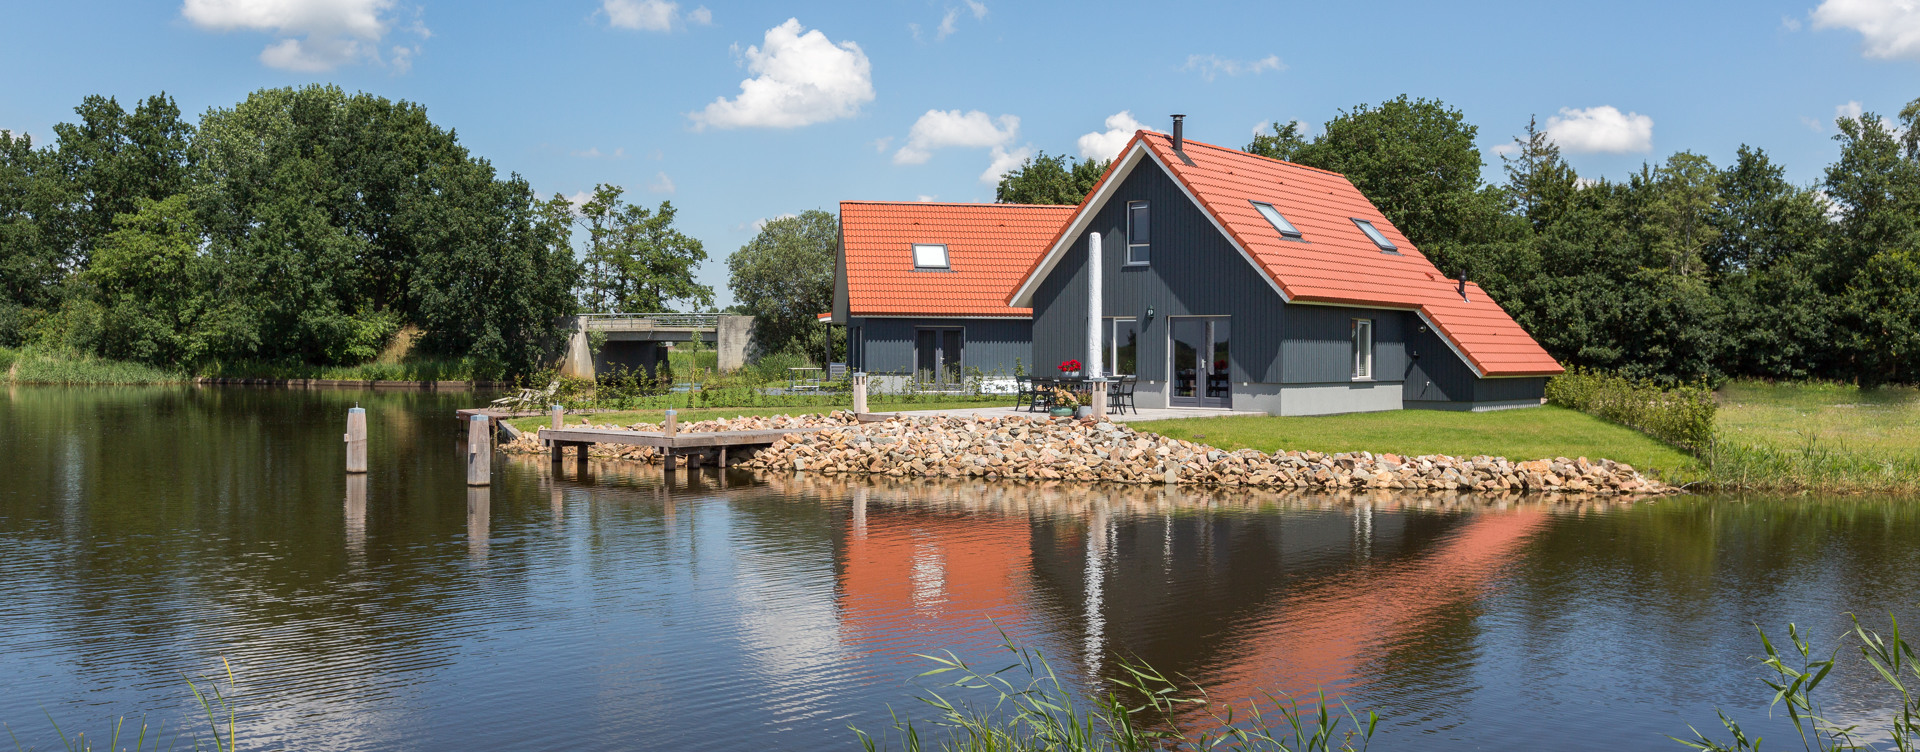 Experience an unforgettable holiday by the water in nature-rich Friesland